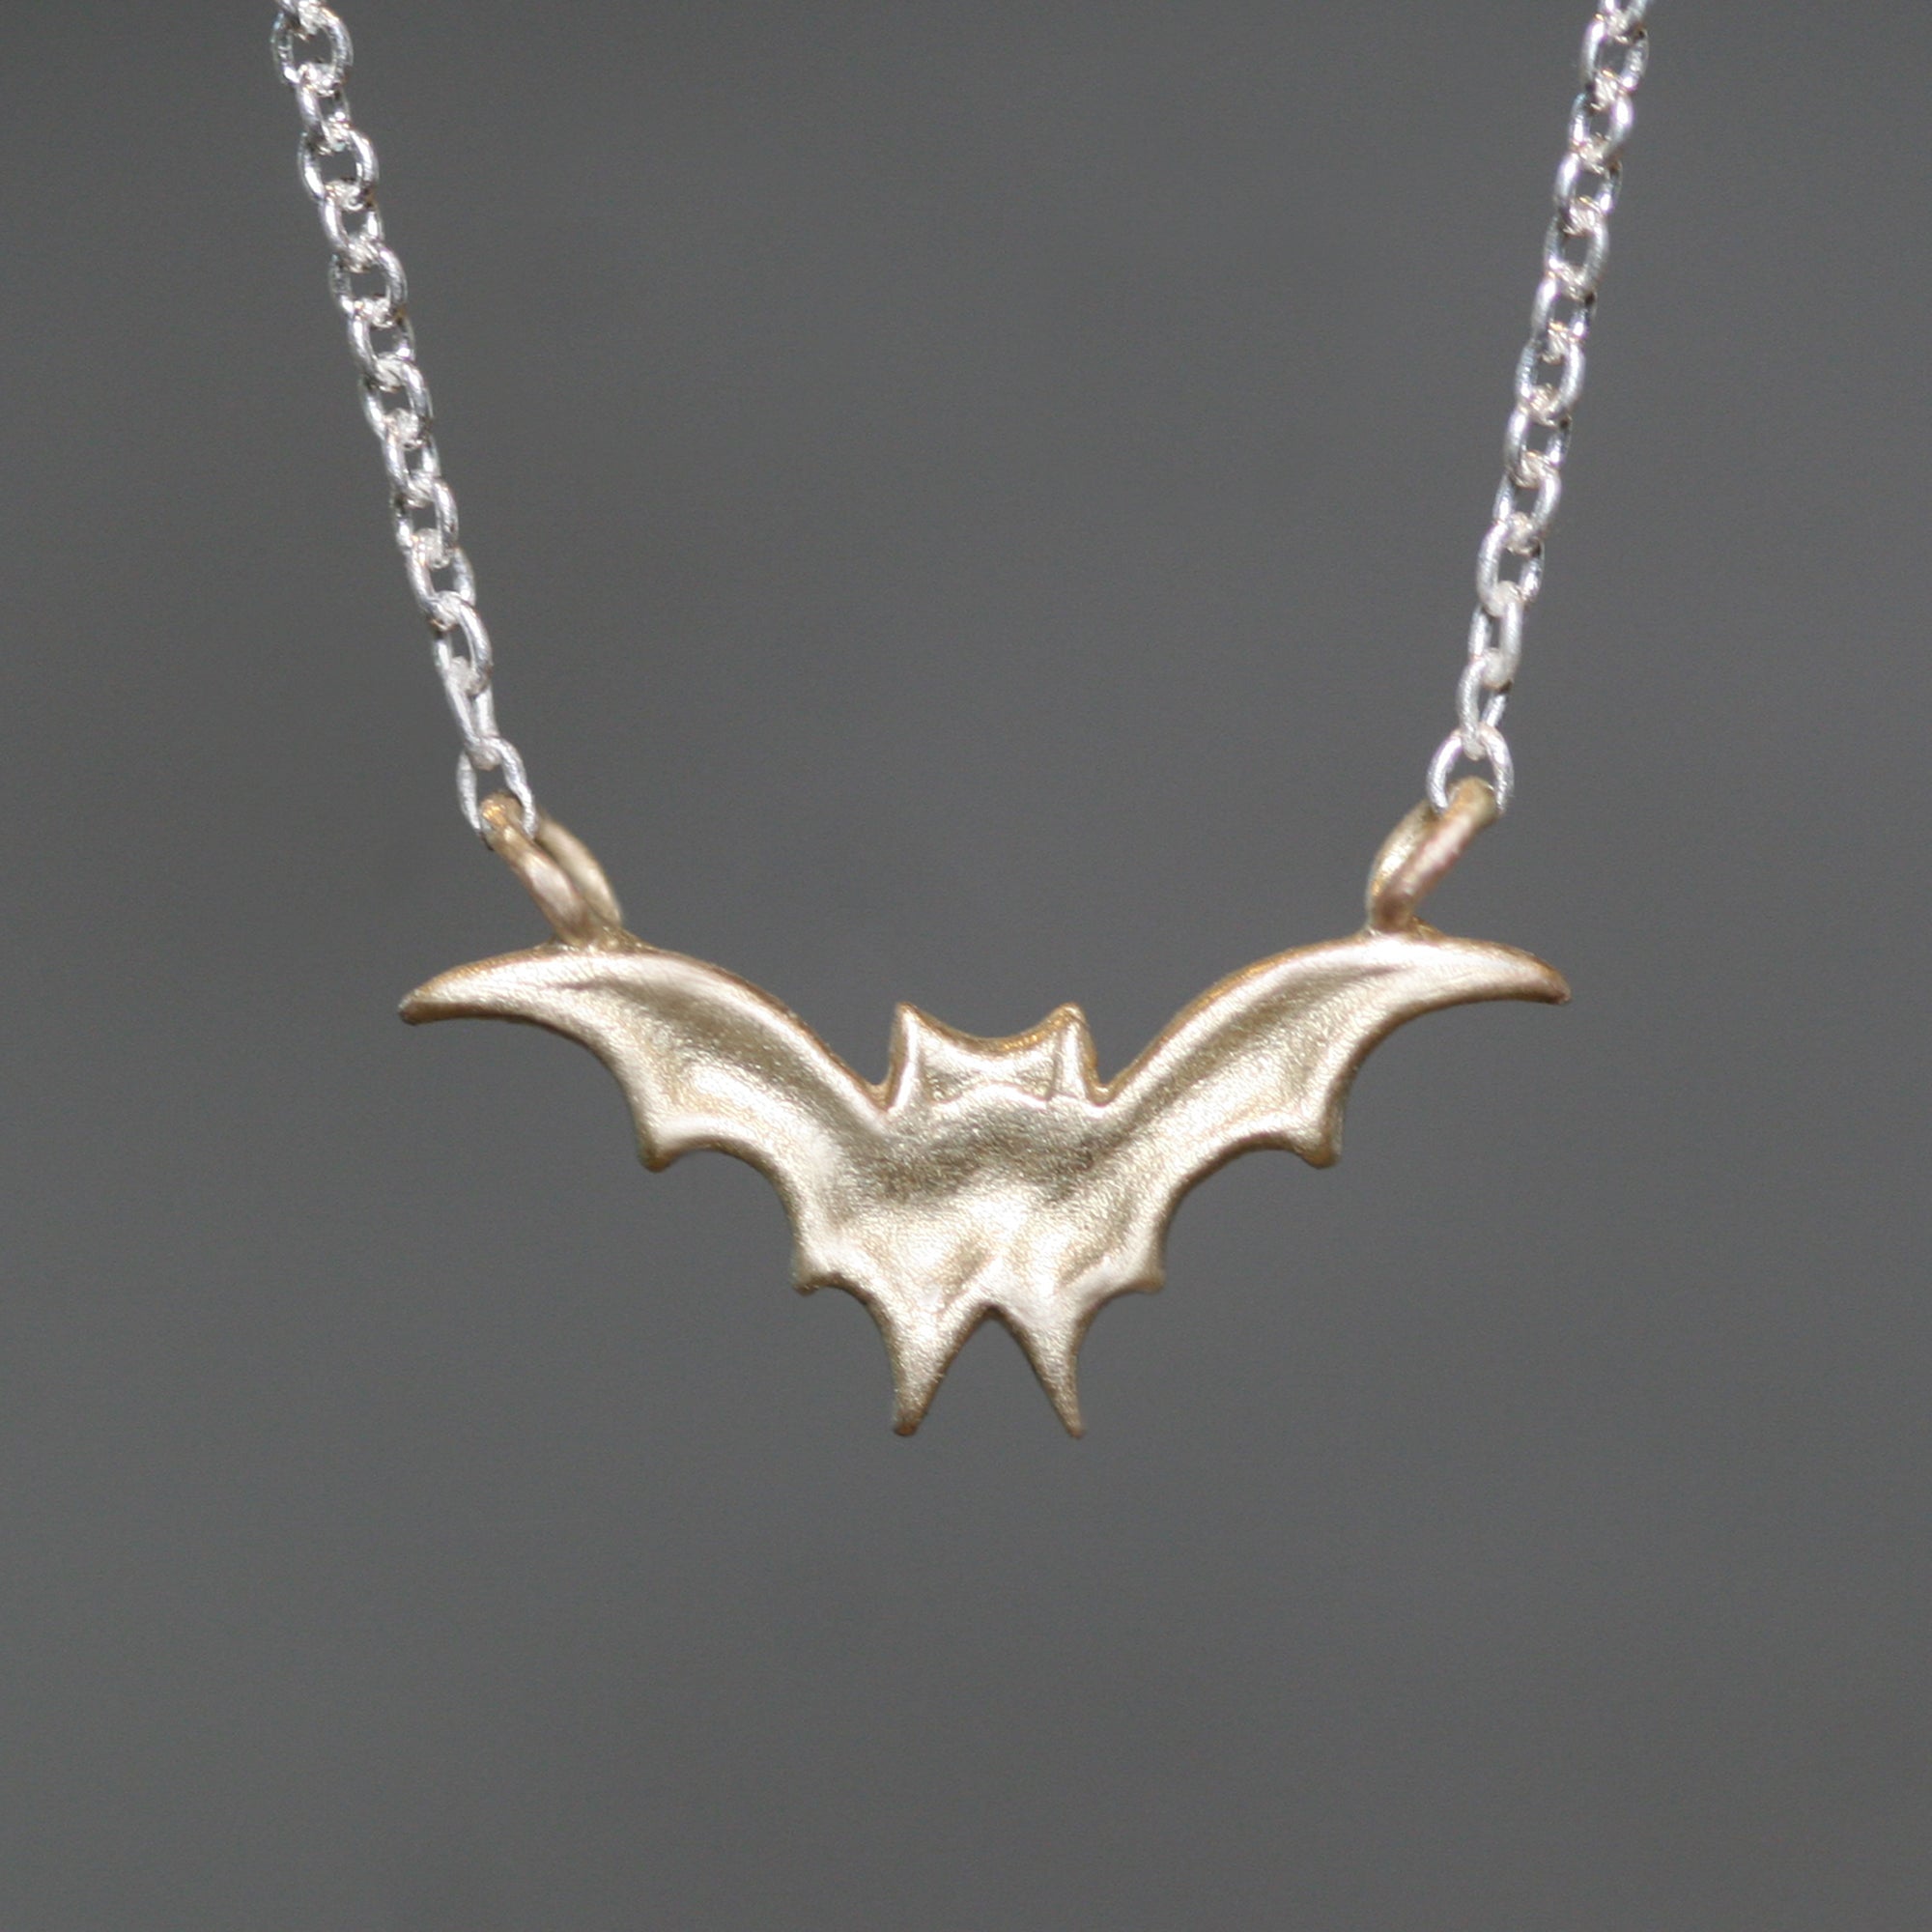 KEVIN N ANNA Sterling Silver Small Bat Charm Necklace, 18